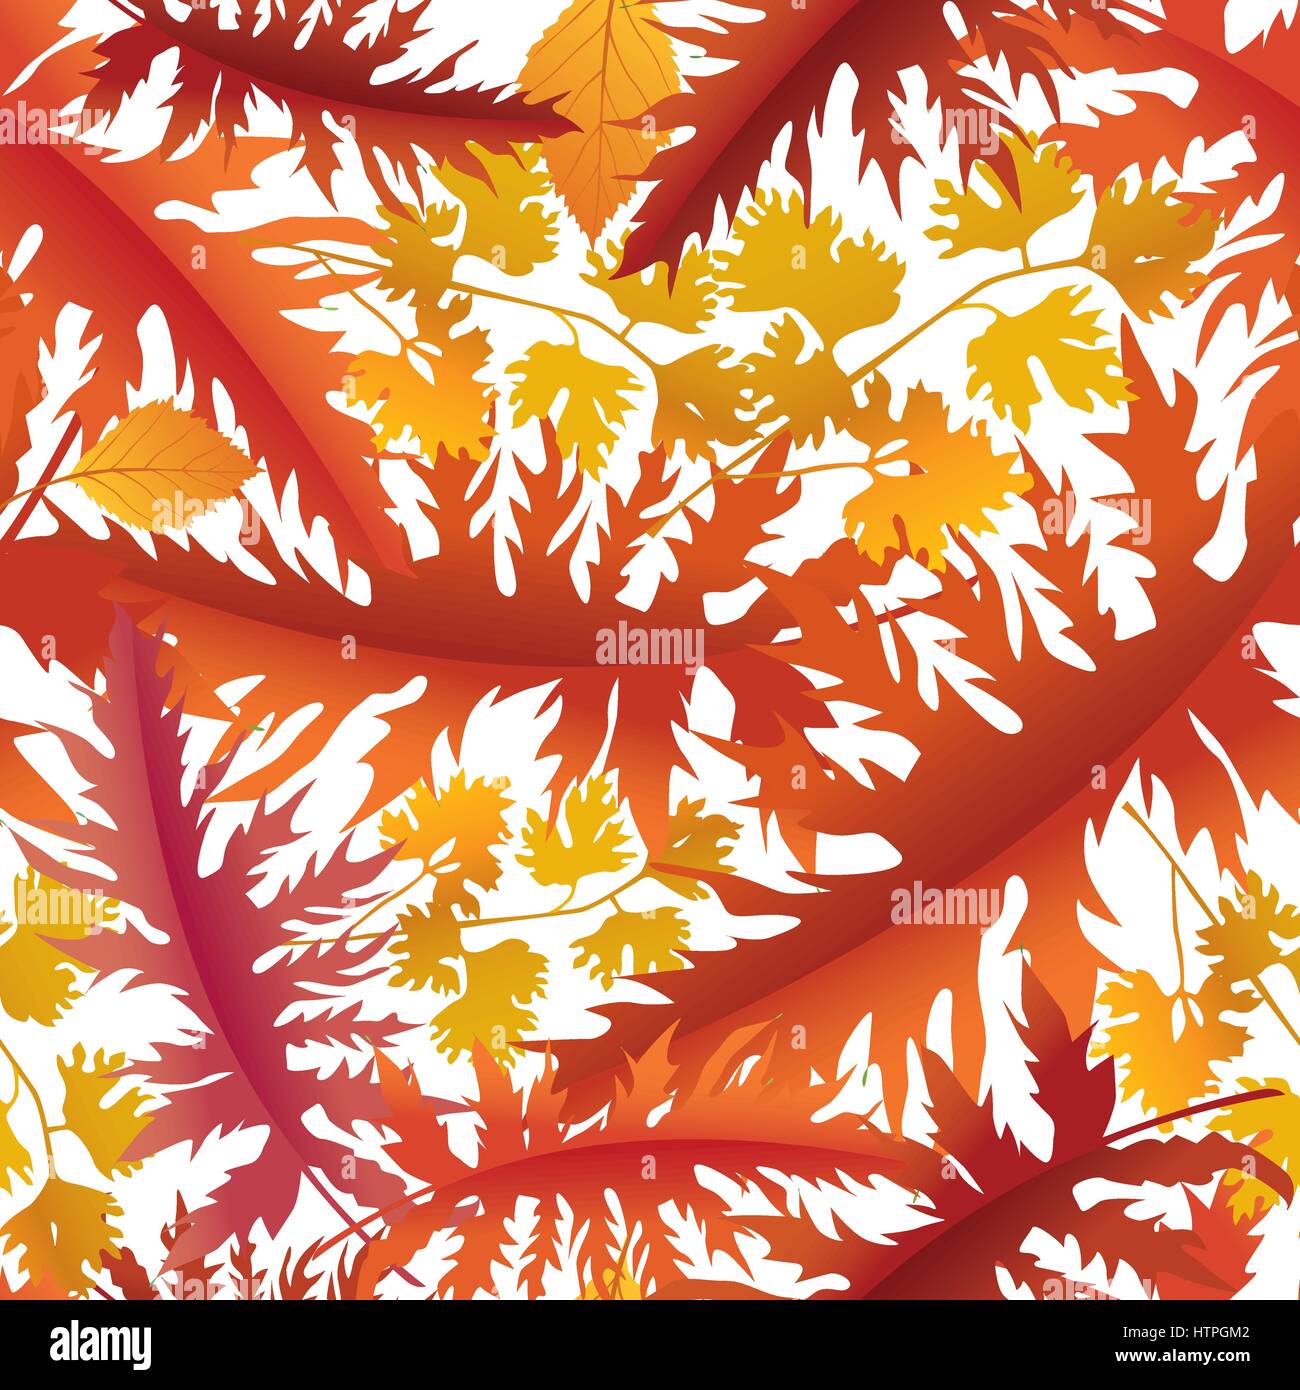 Fall leaf nature Autumn leaves seamless background Season floral pattern Stock Vector